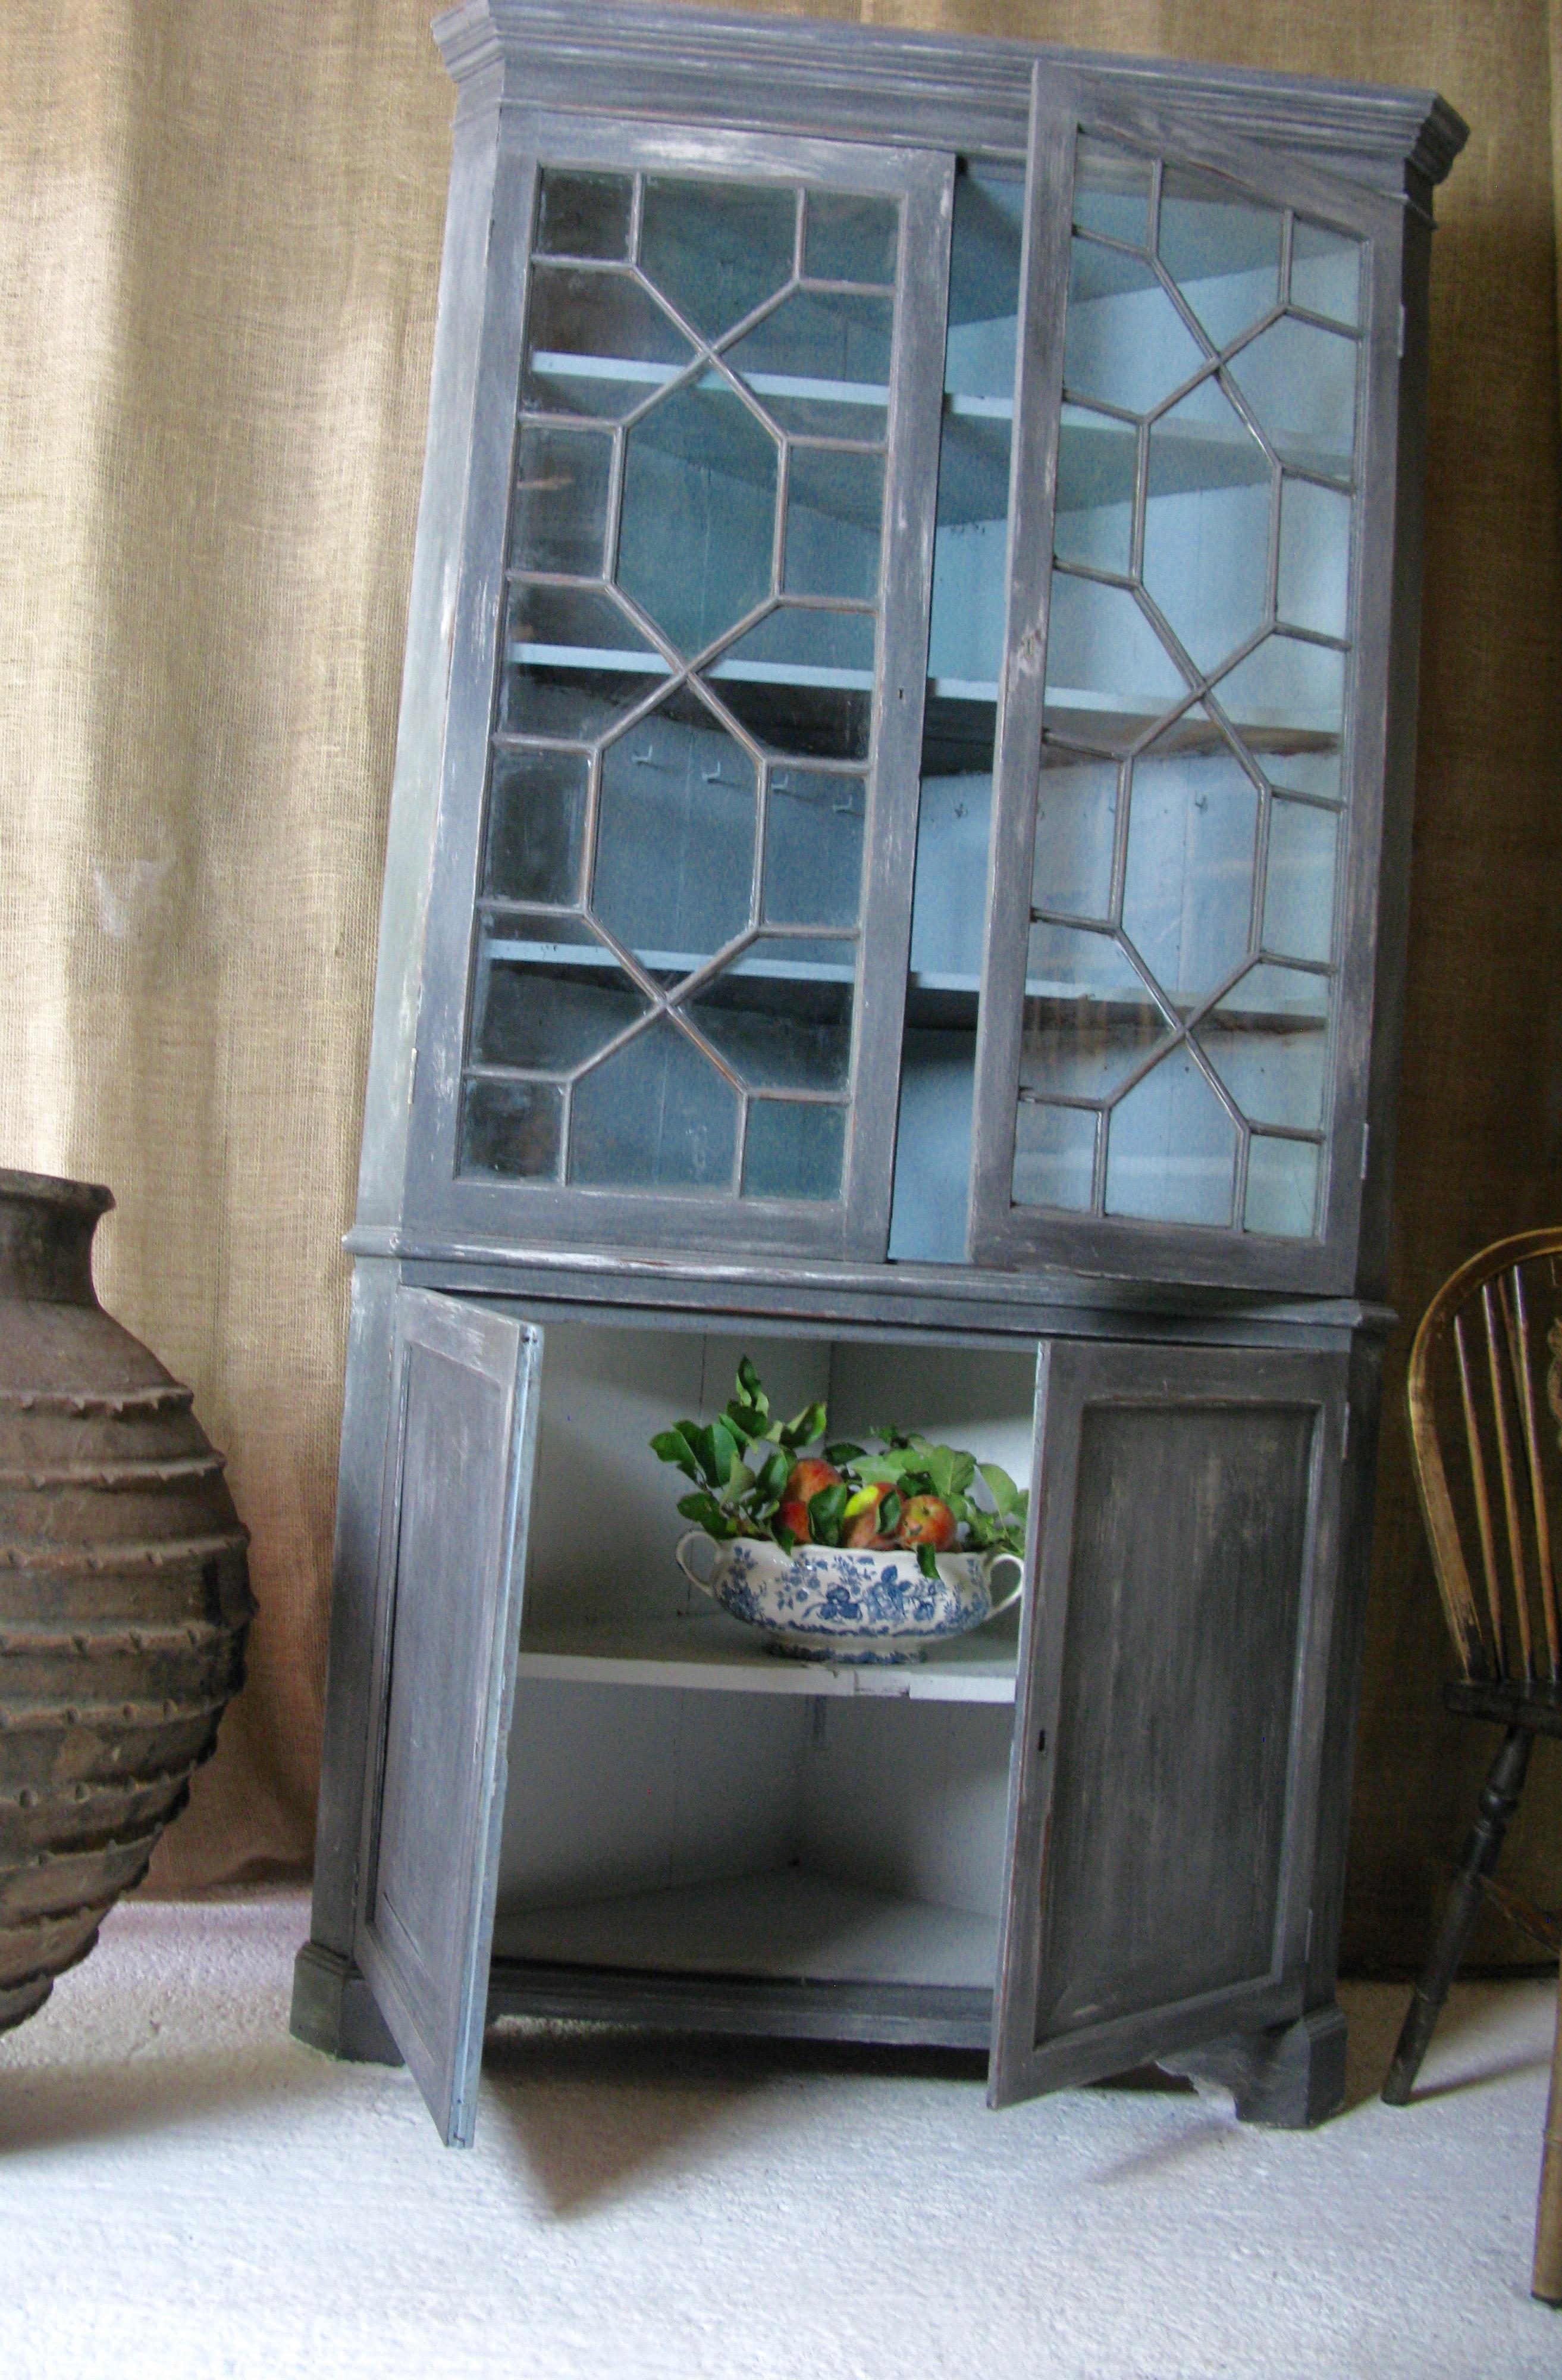 Lovely antique English desirable corner cabinet.

The antique cabinet has borders inside for plates.
Painted in an organic style

My choice; 
This is a lovely cupboard for a kitchen or lovely pantry for jams, chutneys seasonal vegetables and